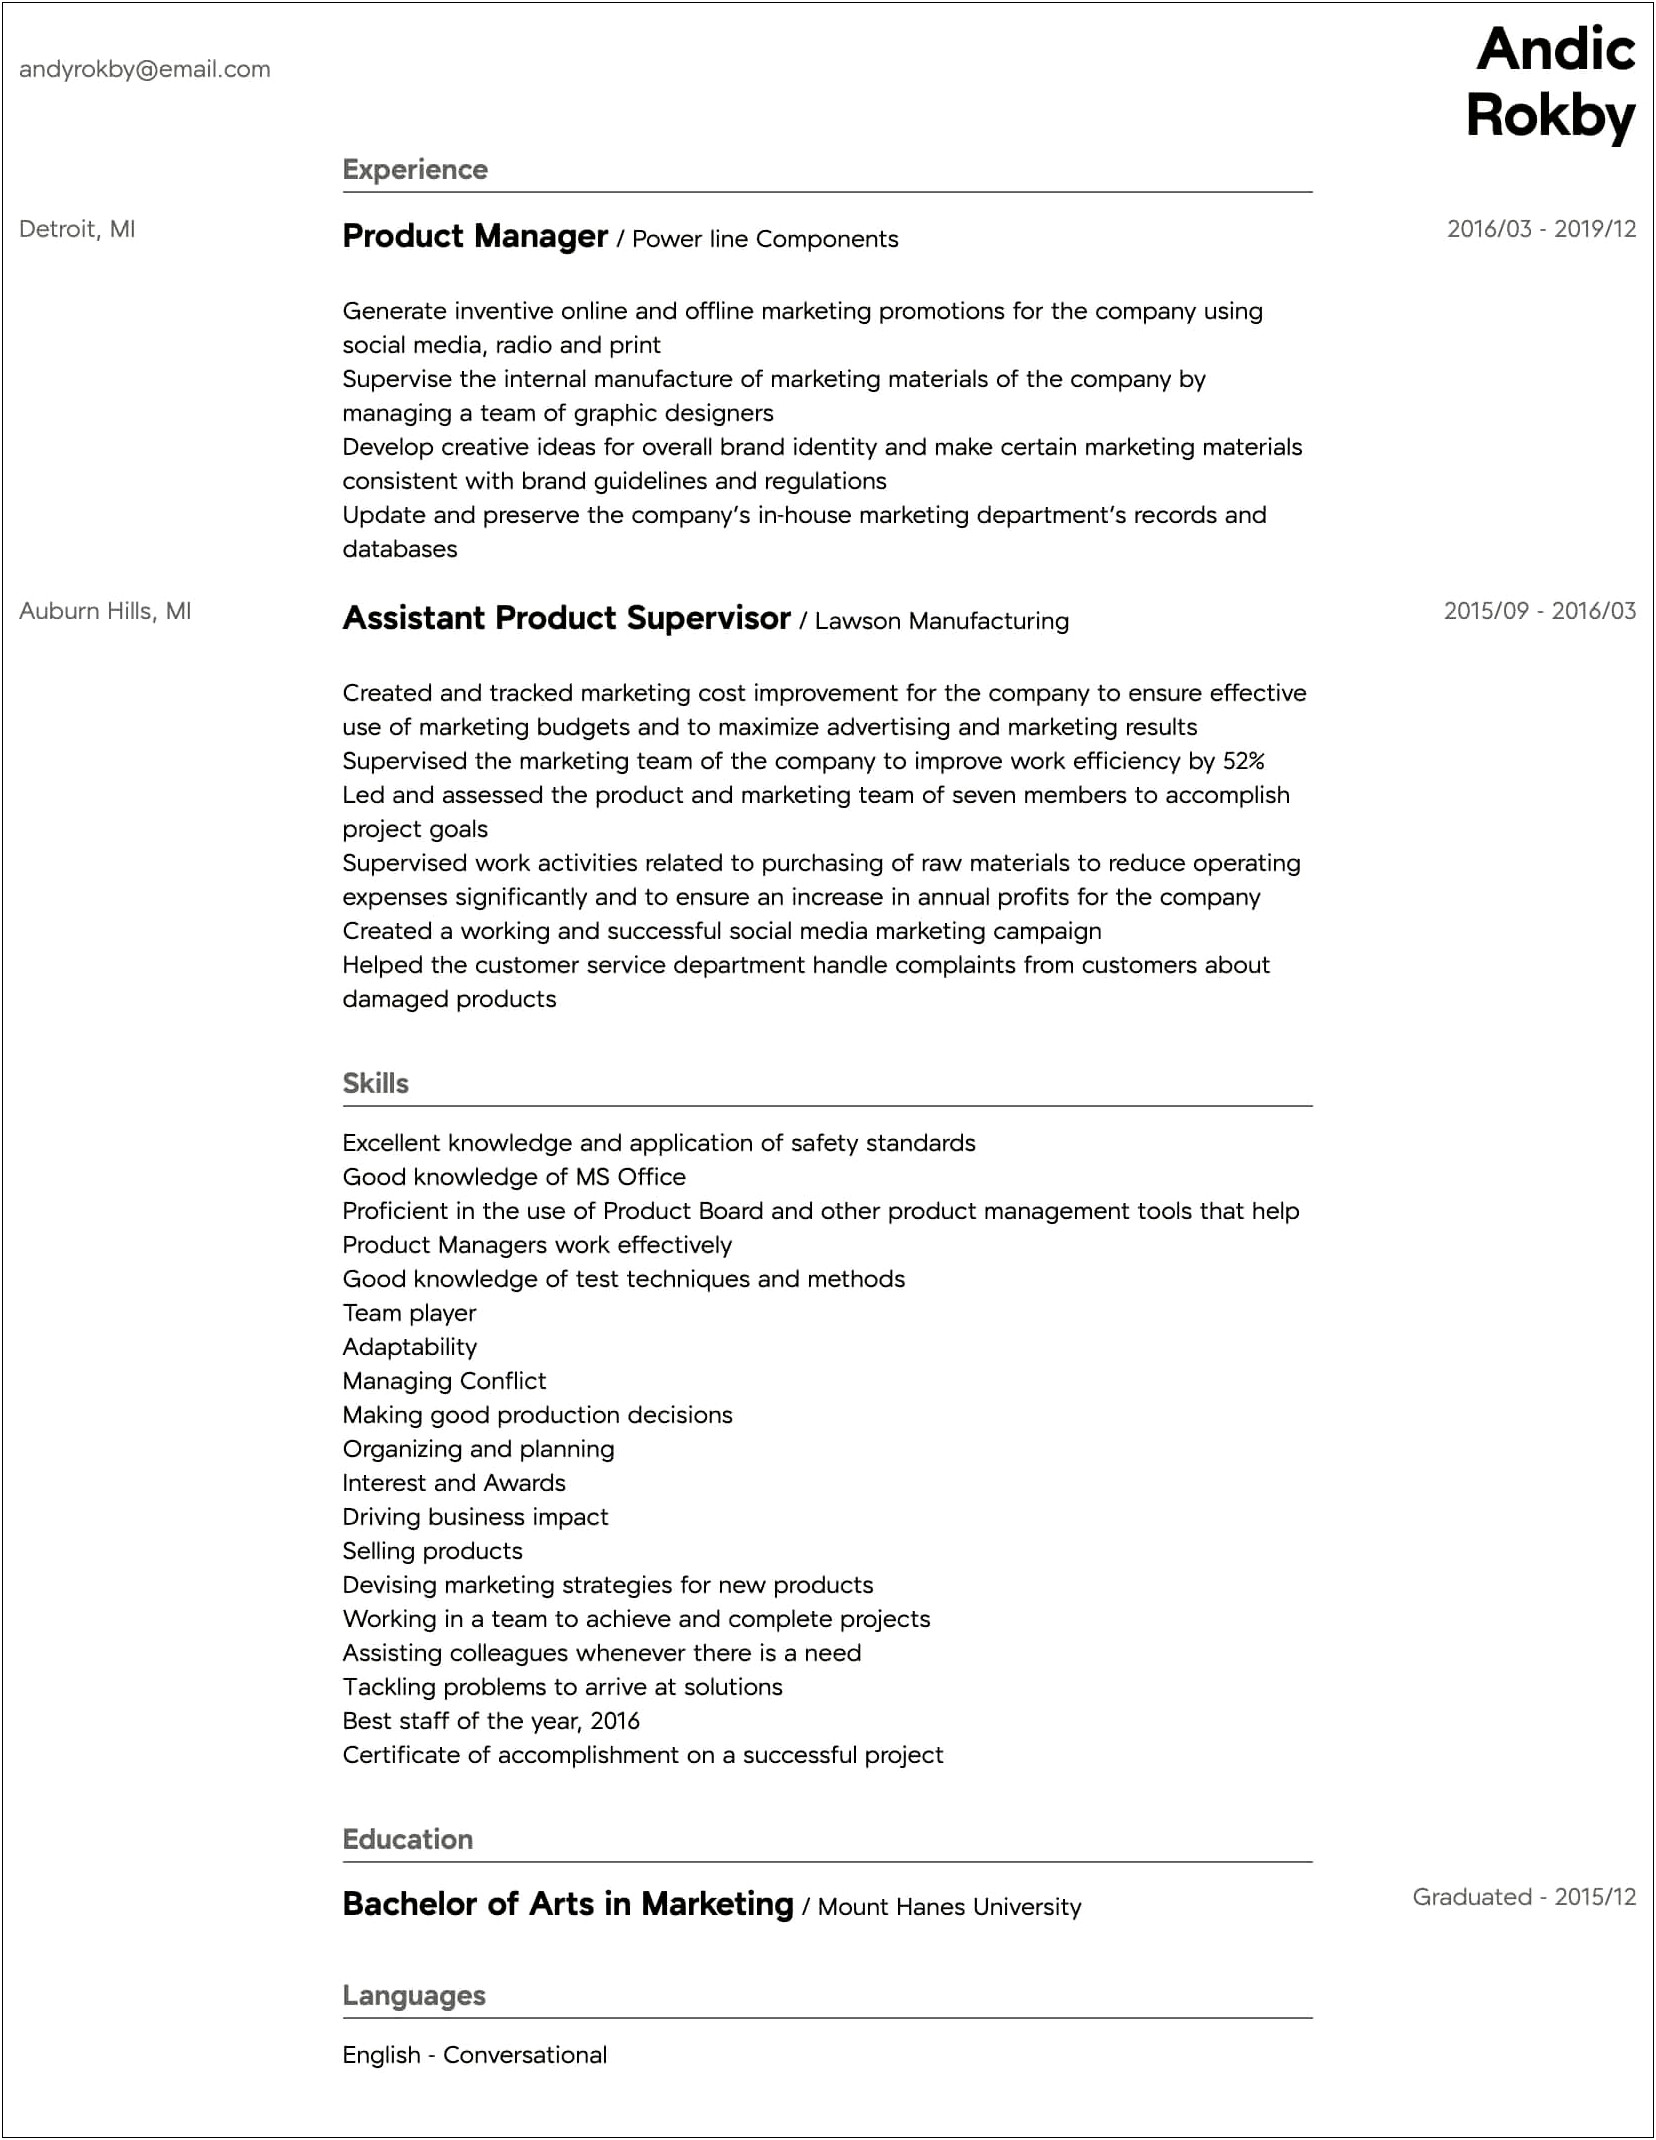 Product Manager Summary Line In Resume